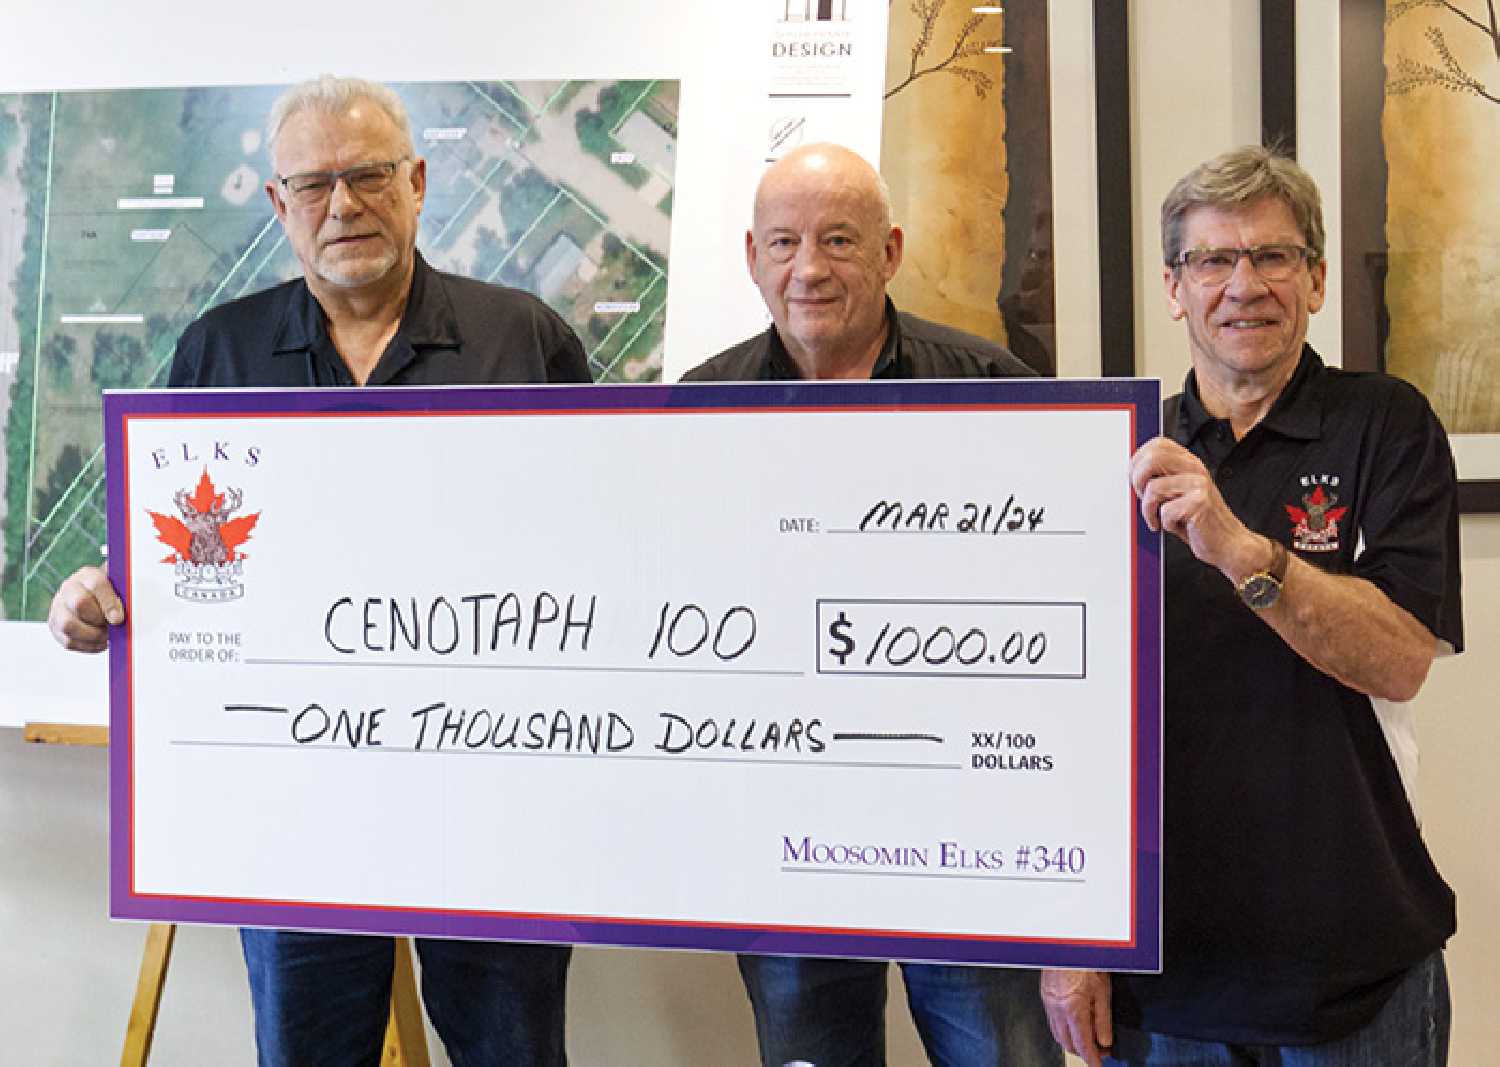 Ron Potter, left, and Mel Konkel, right, with the Moosomin Elks, present a $1,000 cheque to Brian Beckett, centre, of the Cenotaph 100 Committee to help with fundraising for the event. The presentation was made at the Chamber meeting last week.